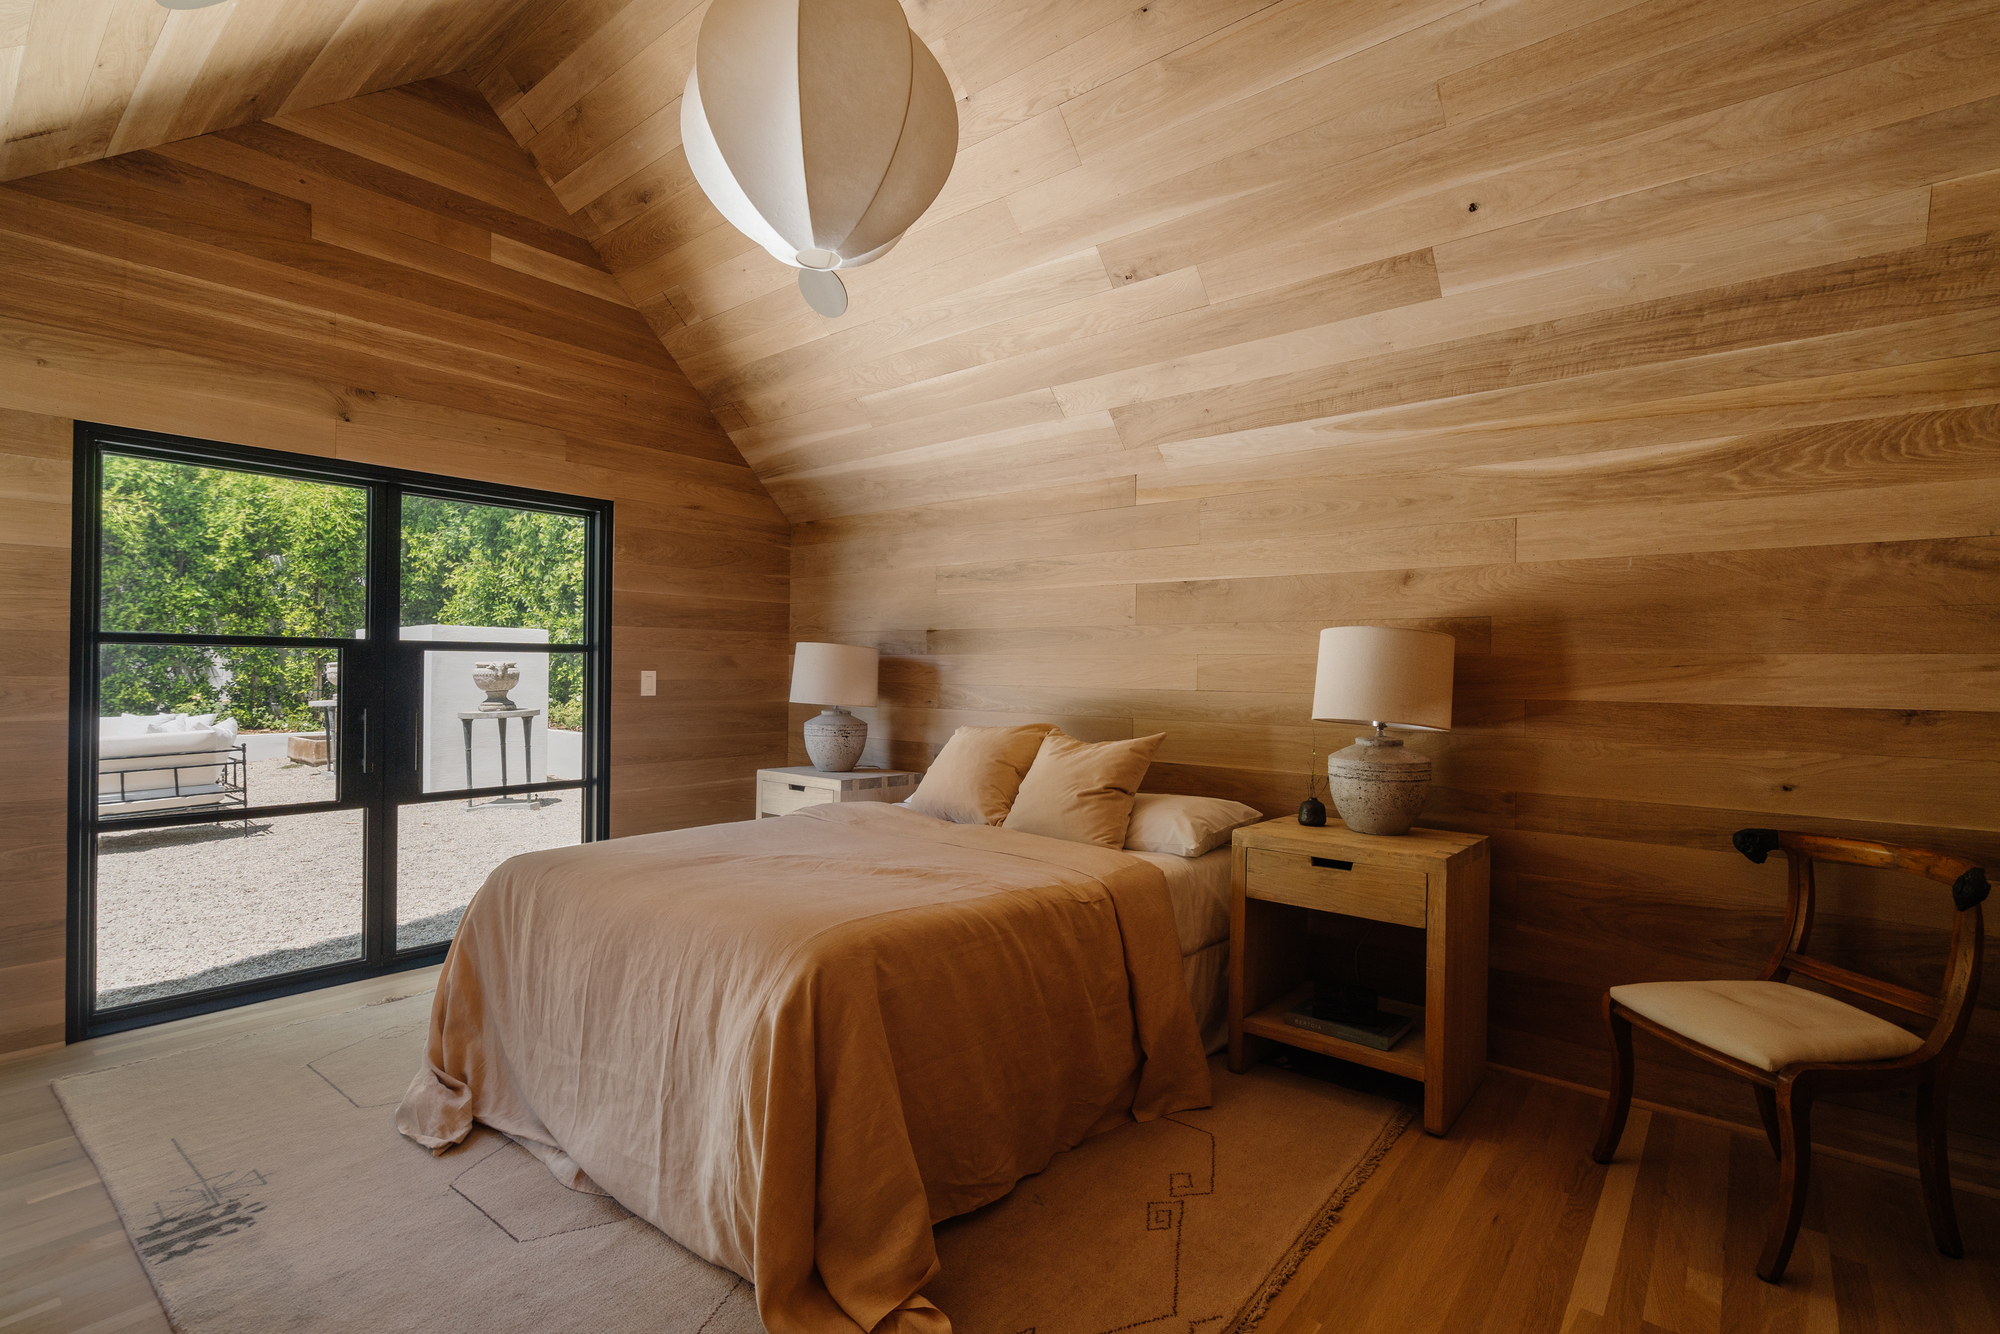 A bedroom clad in wooden wall panelling